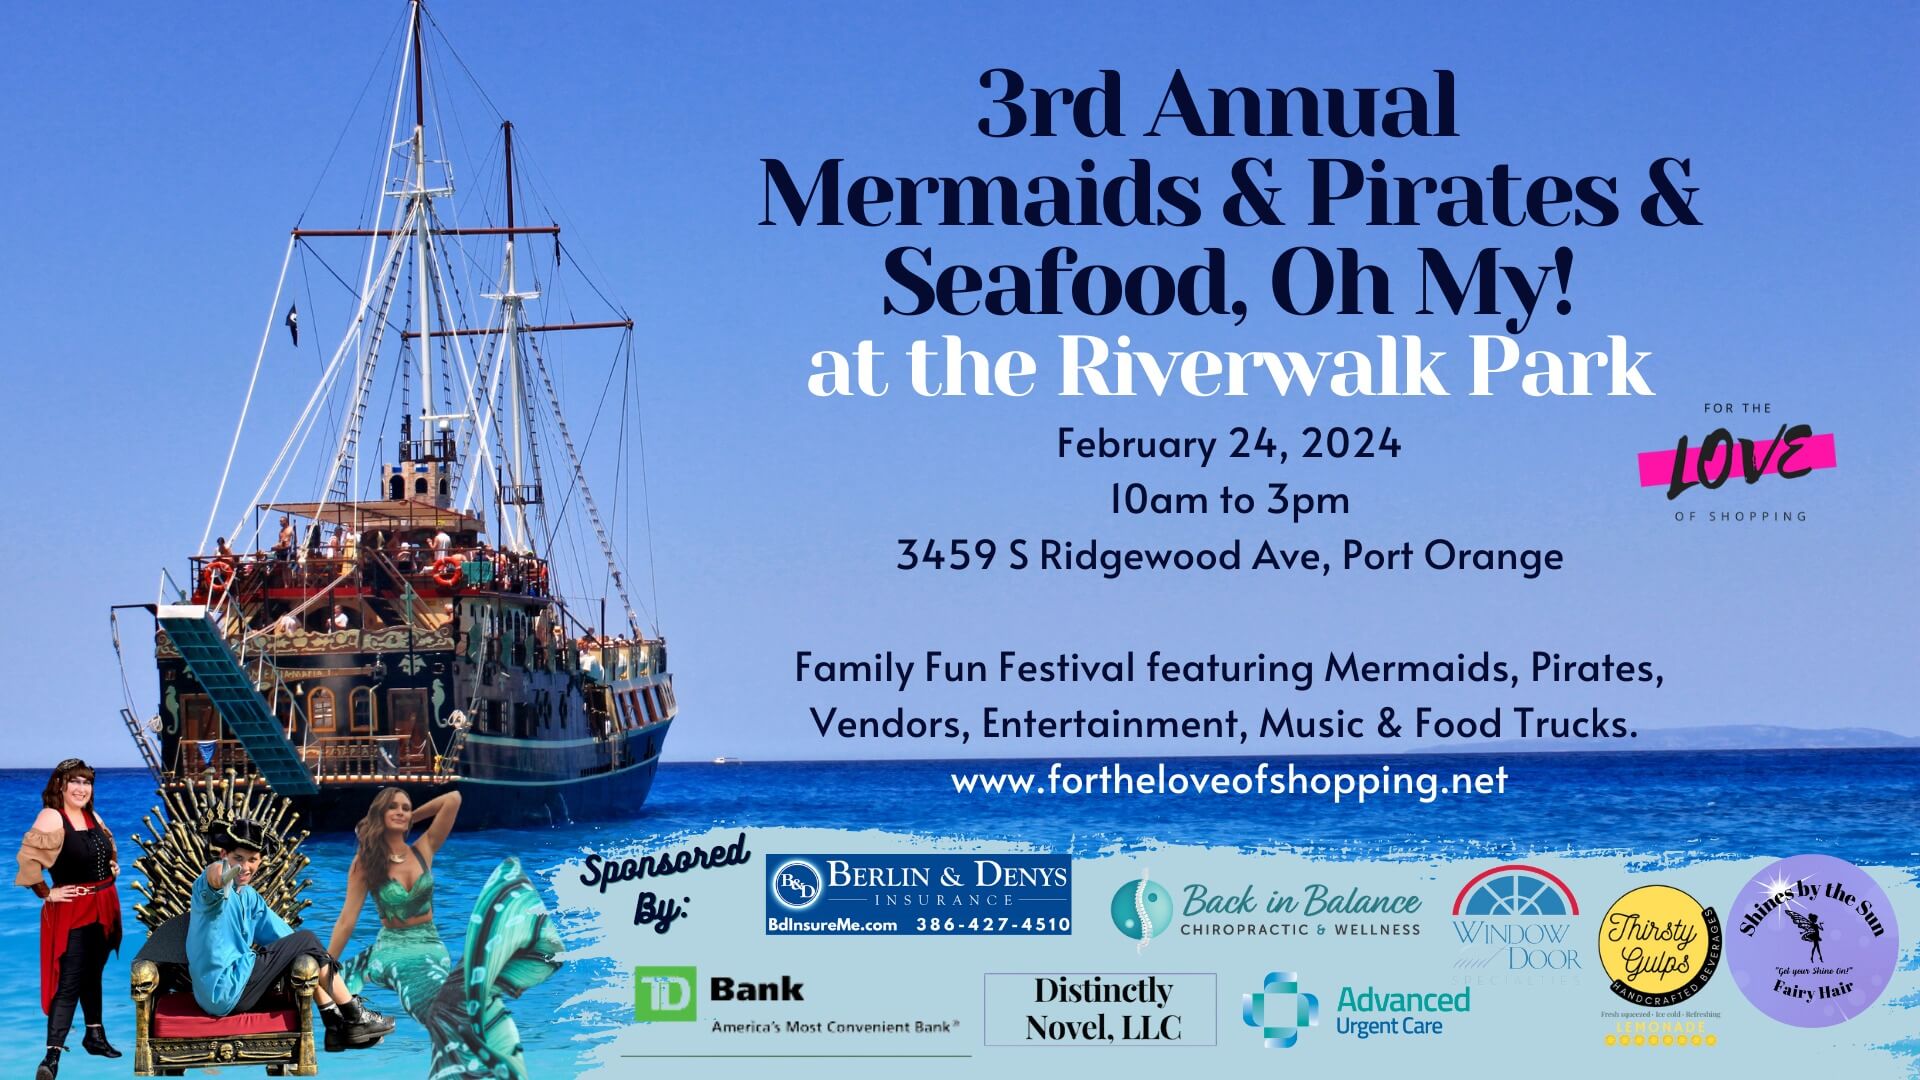 Mermaids pirates and seafood promotional flyer